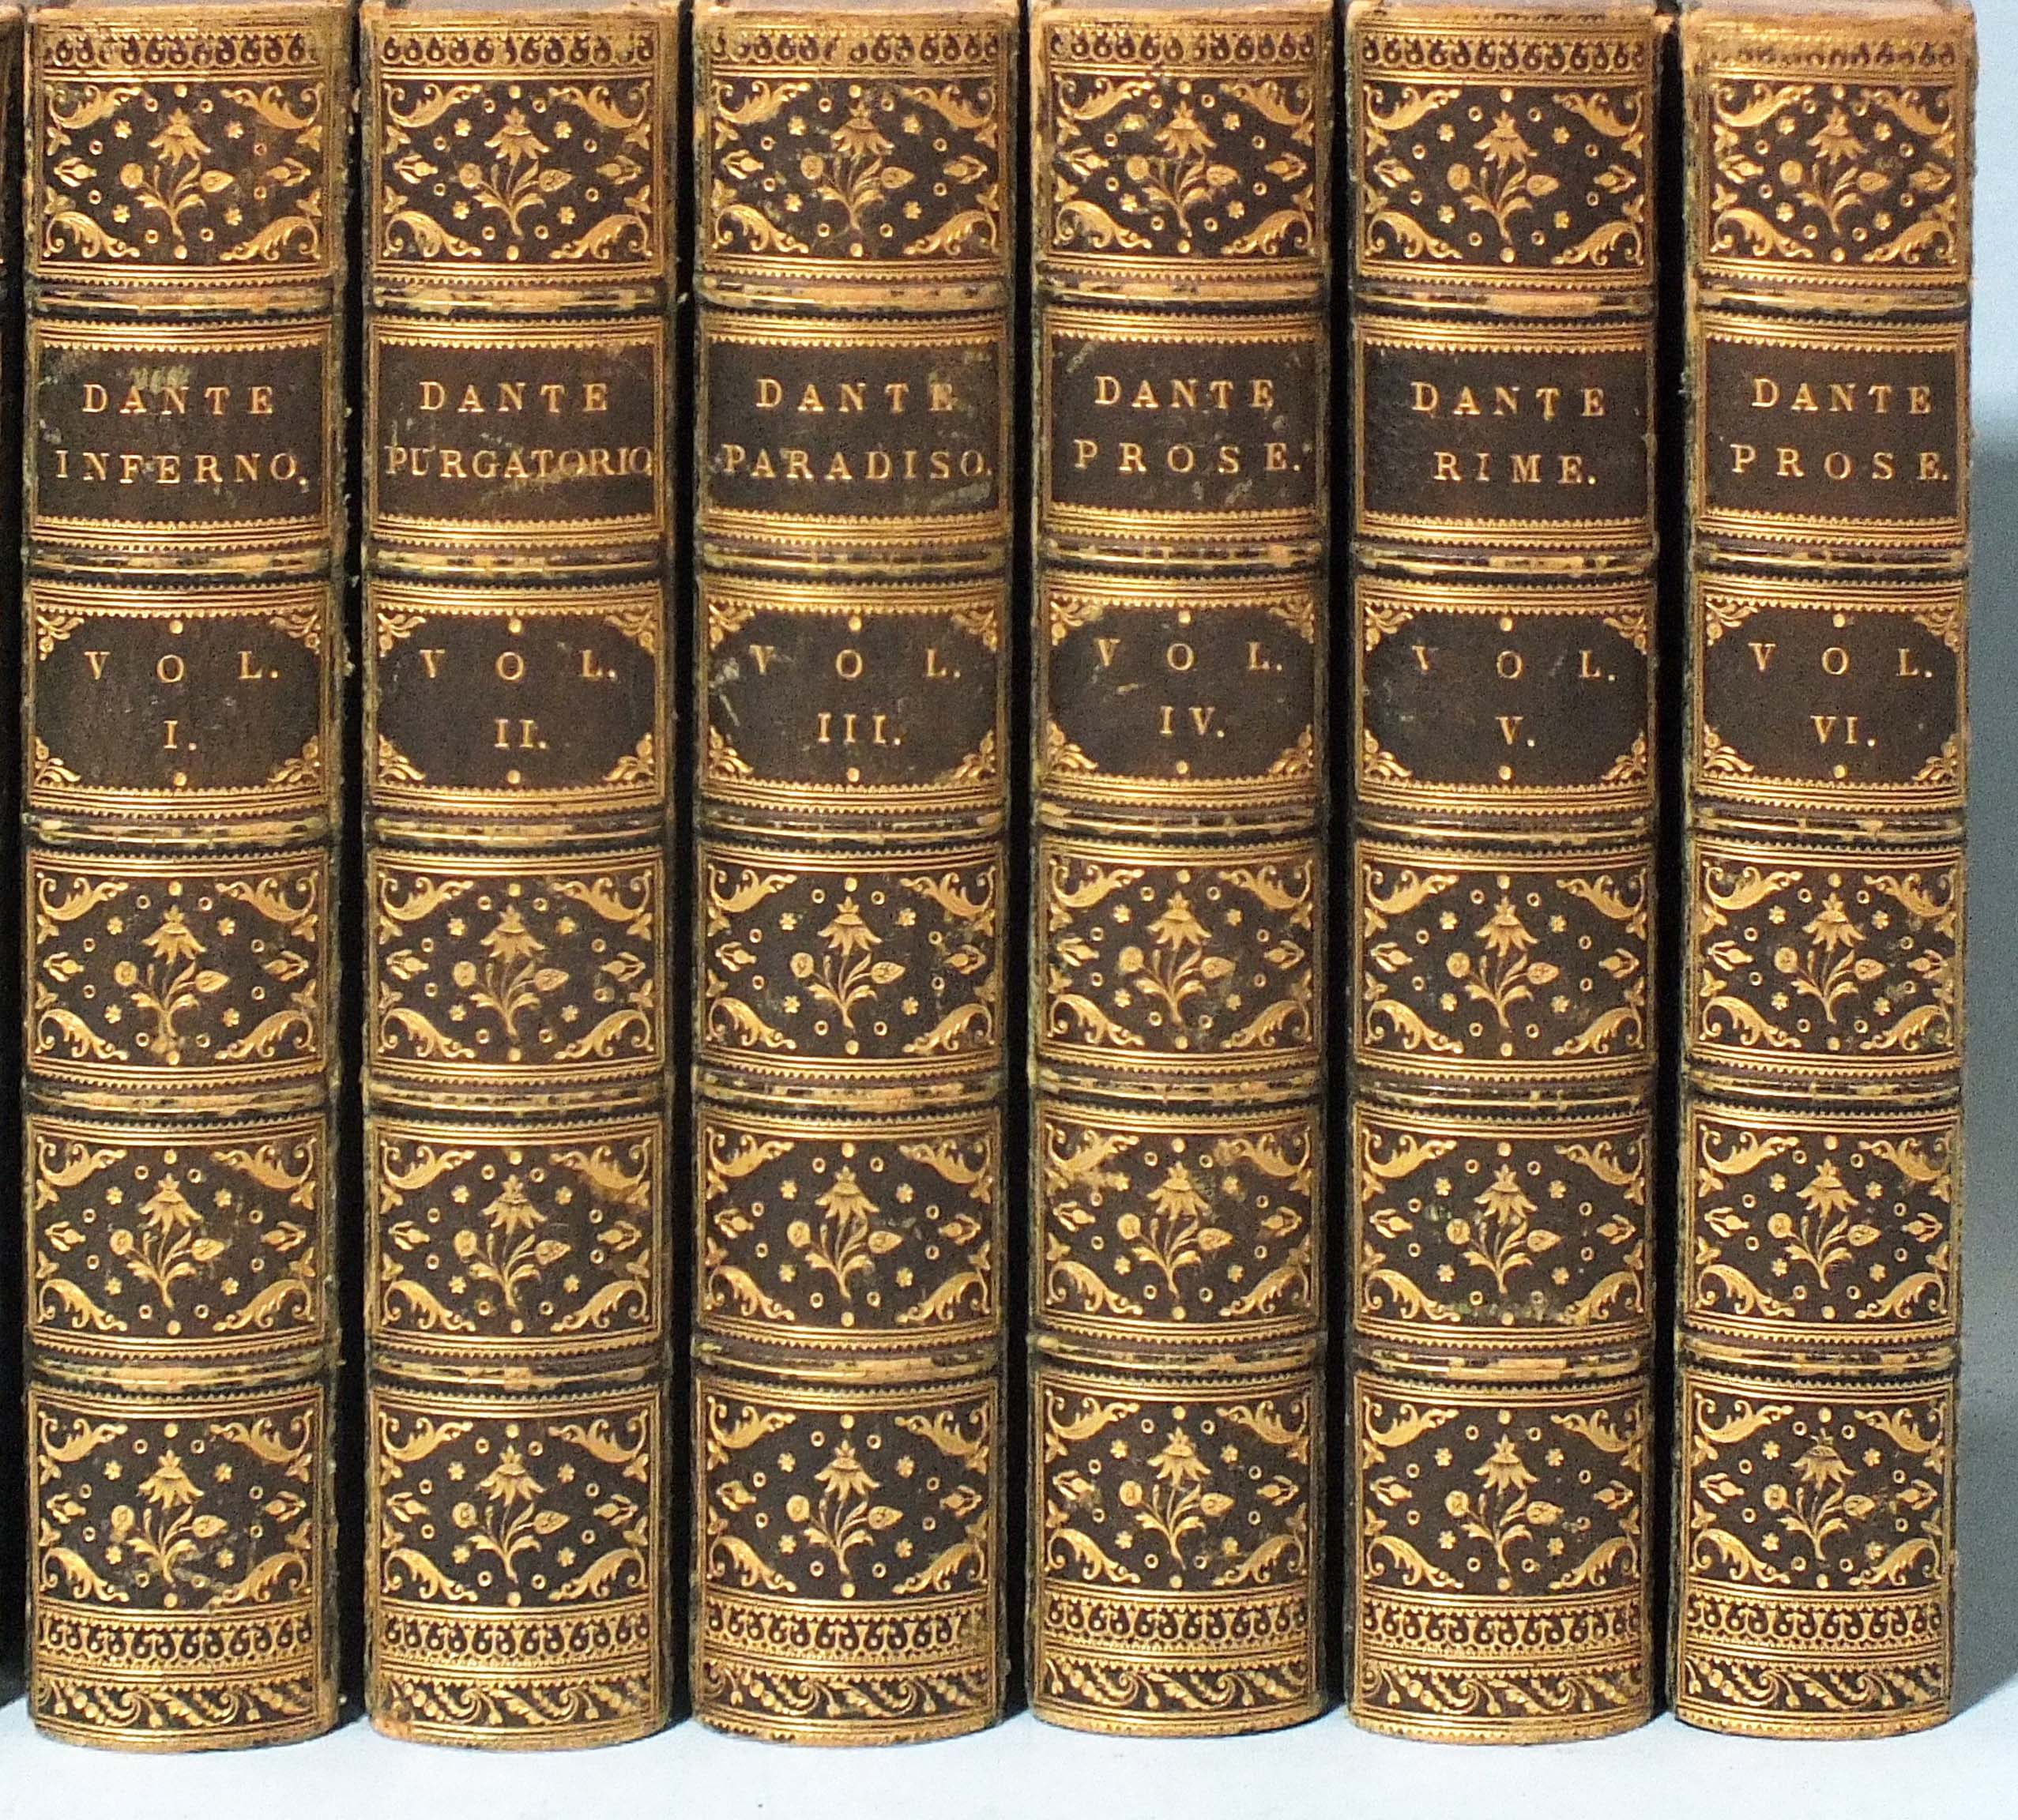 The Works of Dante in Six Volumes Fine Binding